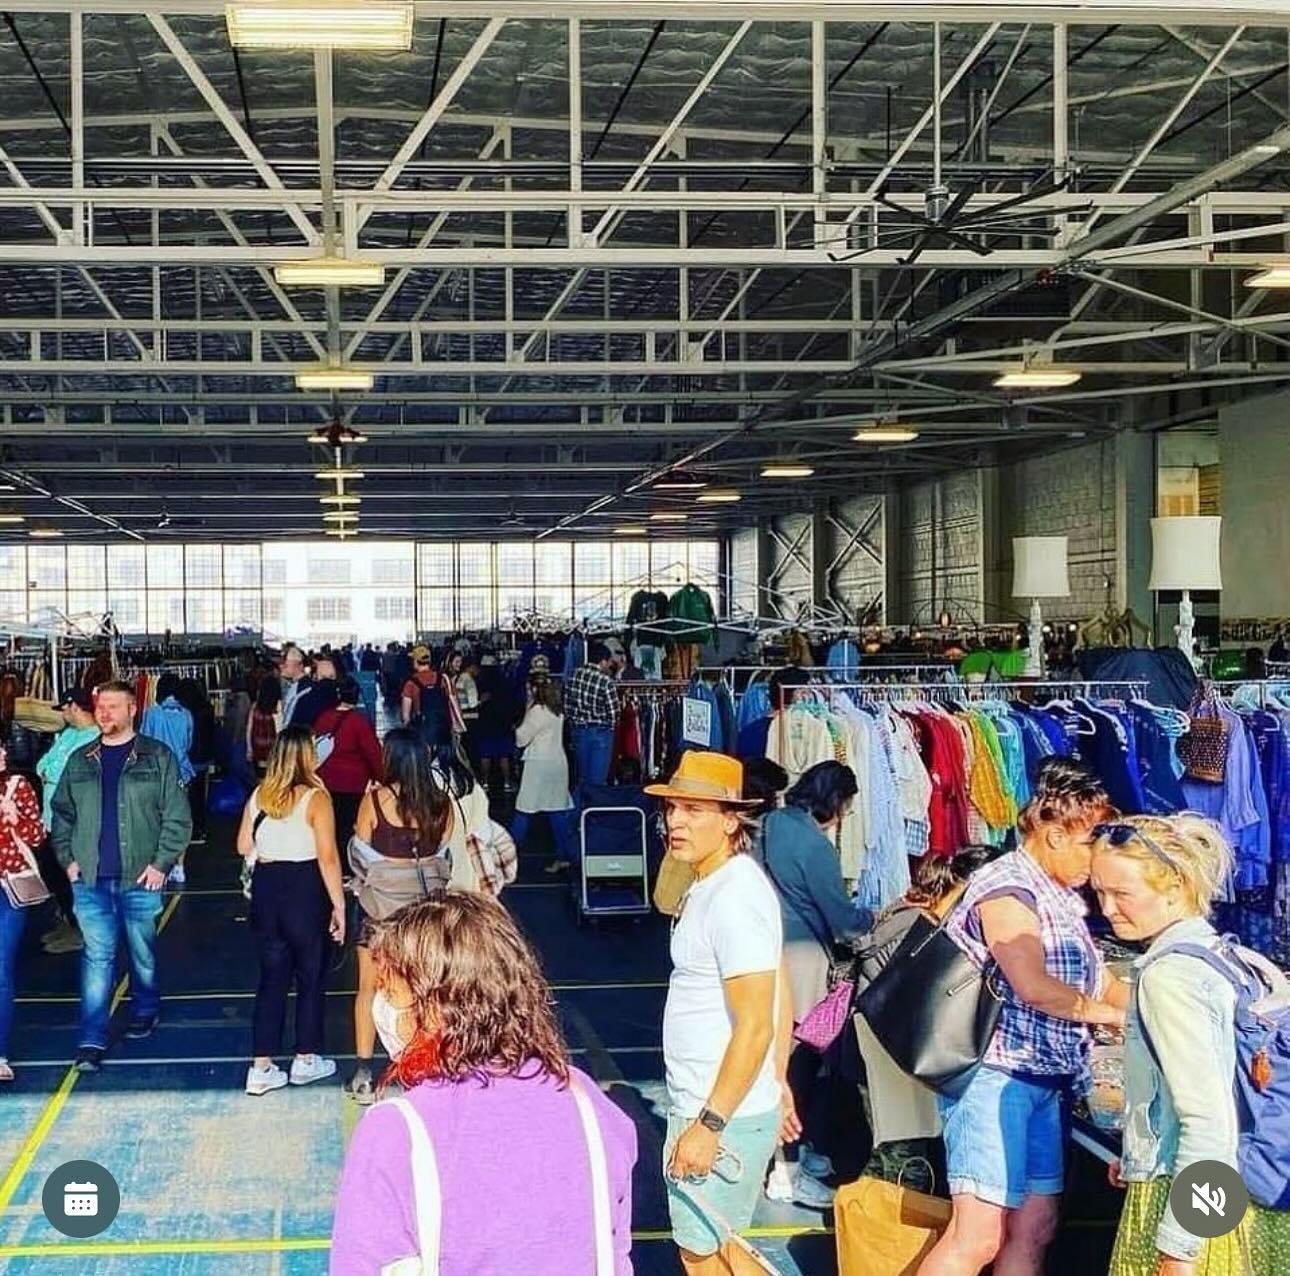 HANGAR 30 FLEA returns May 25th! Tickets go on sale tomorrow for our BIG Summer Show at 12pm! @hangar30_flea is giving away 100 FREE  TICKETS at 12pm - so come join us on Sat., May 25th 12-6pm to shop 100 BOOTHS. Don&rsquo;t miss out and join us for 